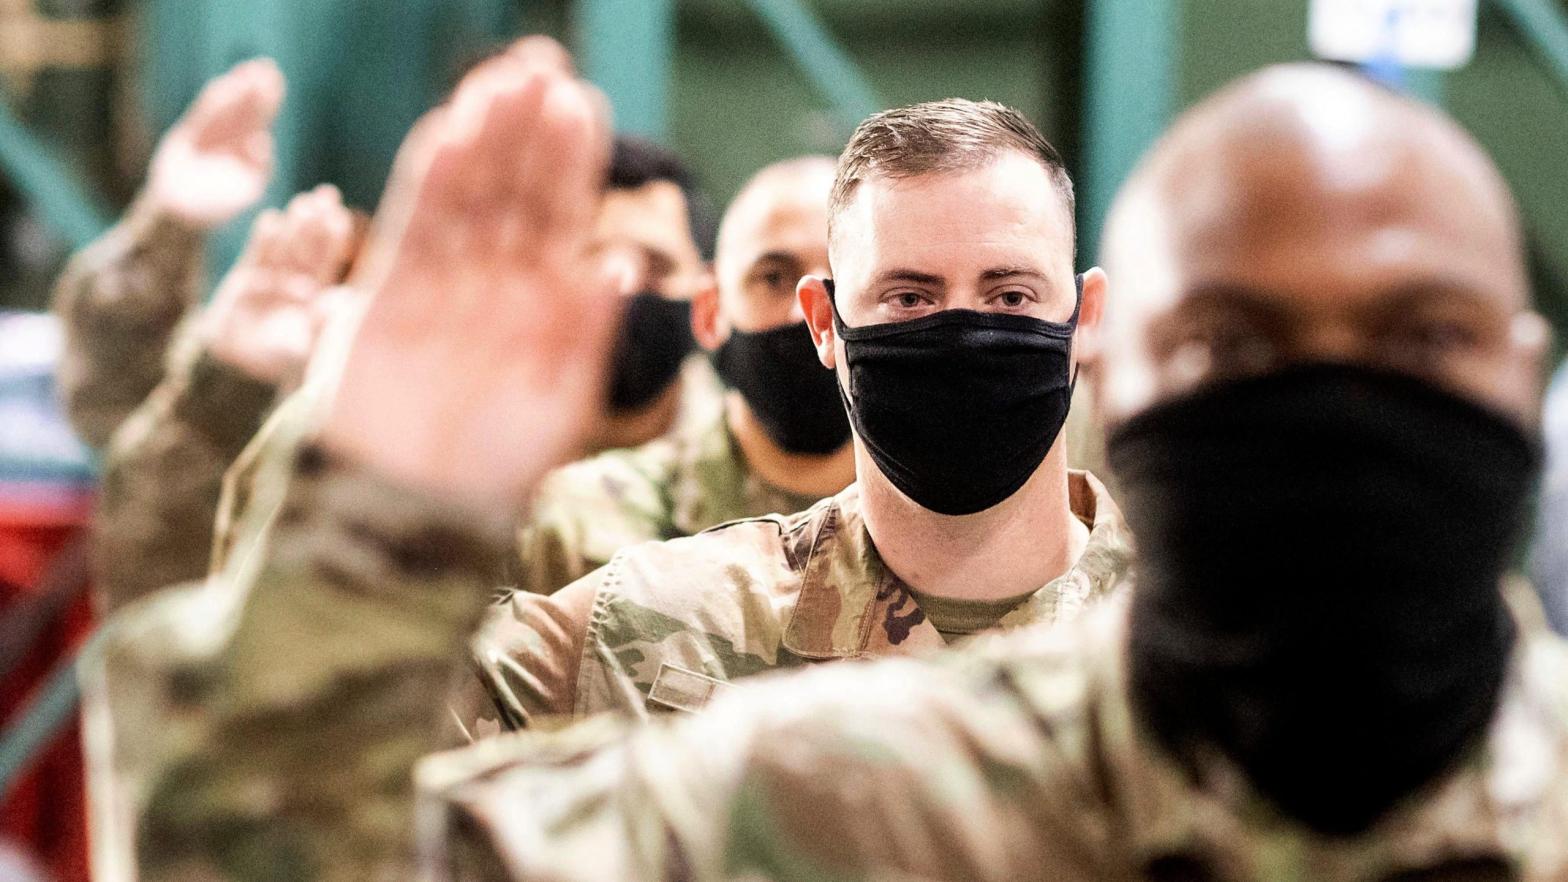 Air Force personnel reciting an oath to join the Space Force at Travis Air Force Base in California in February 2021. (Photo: Noah Berger, AP)